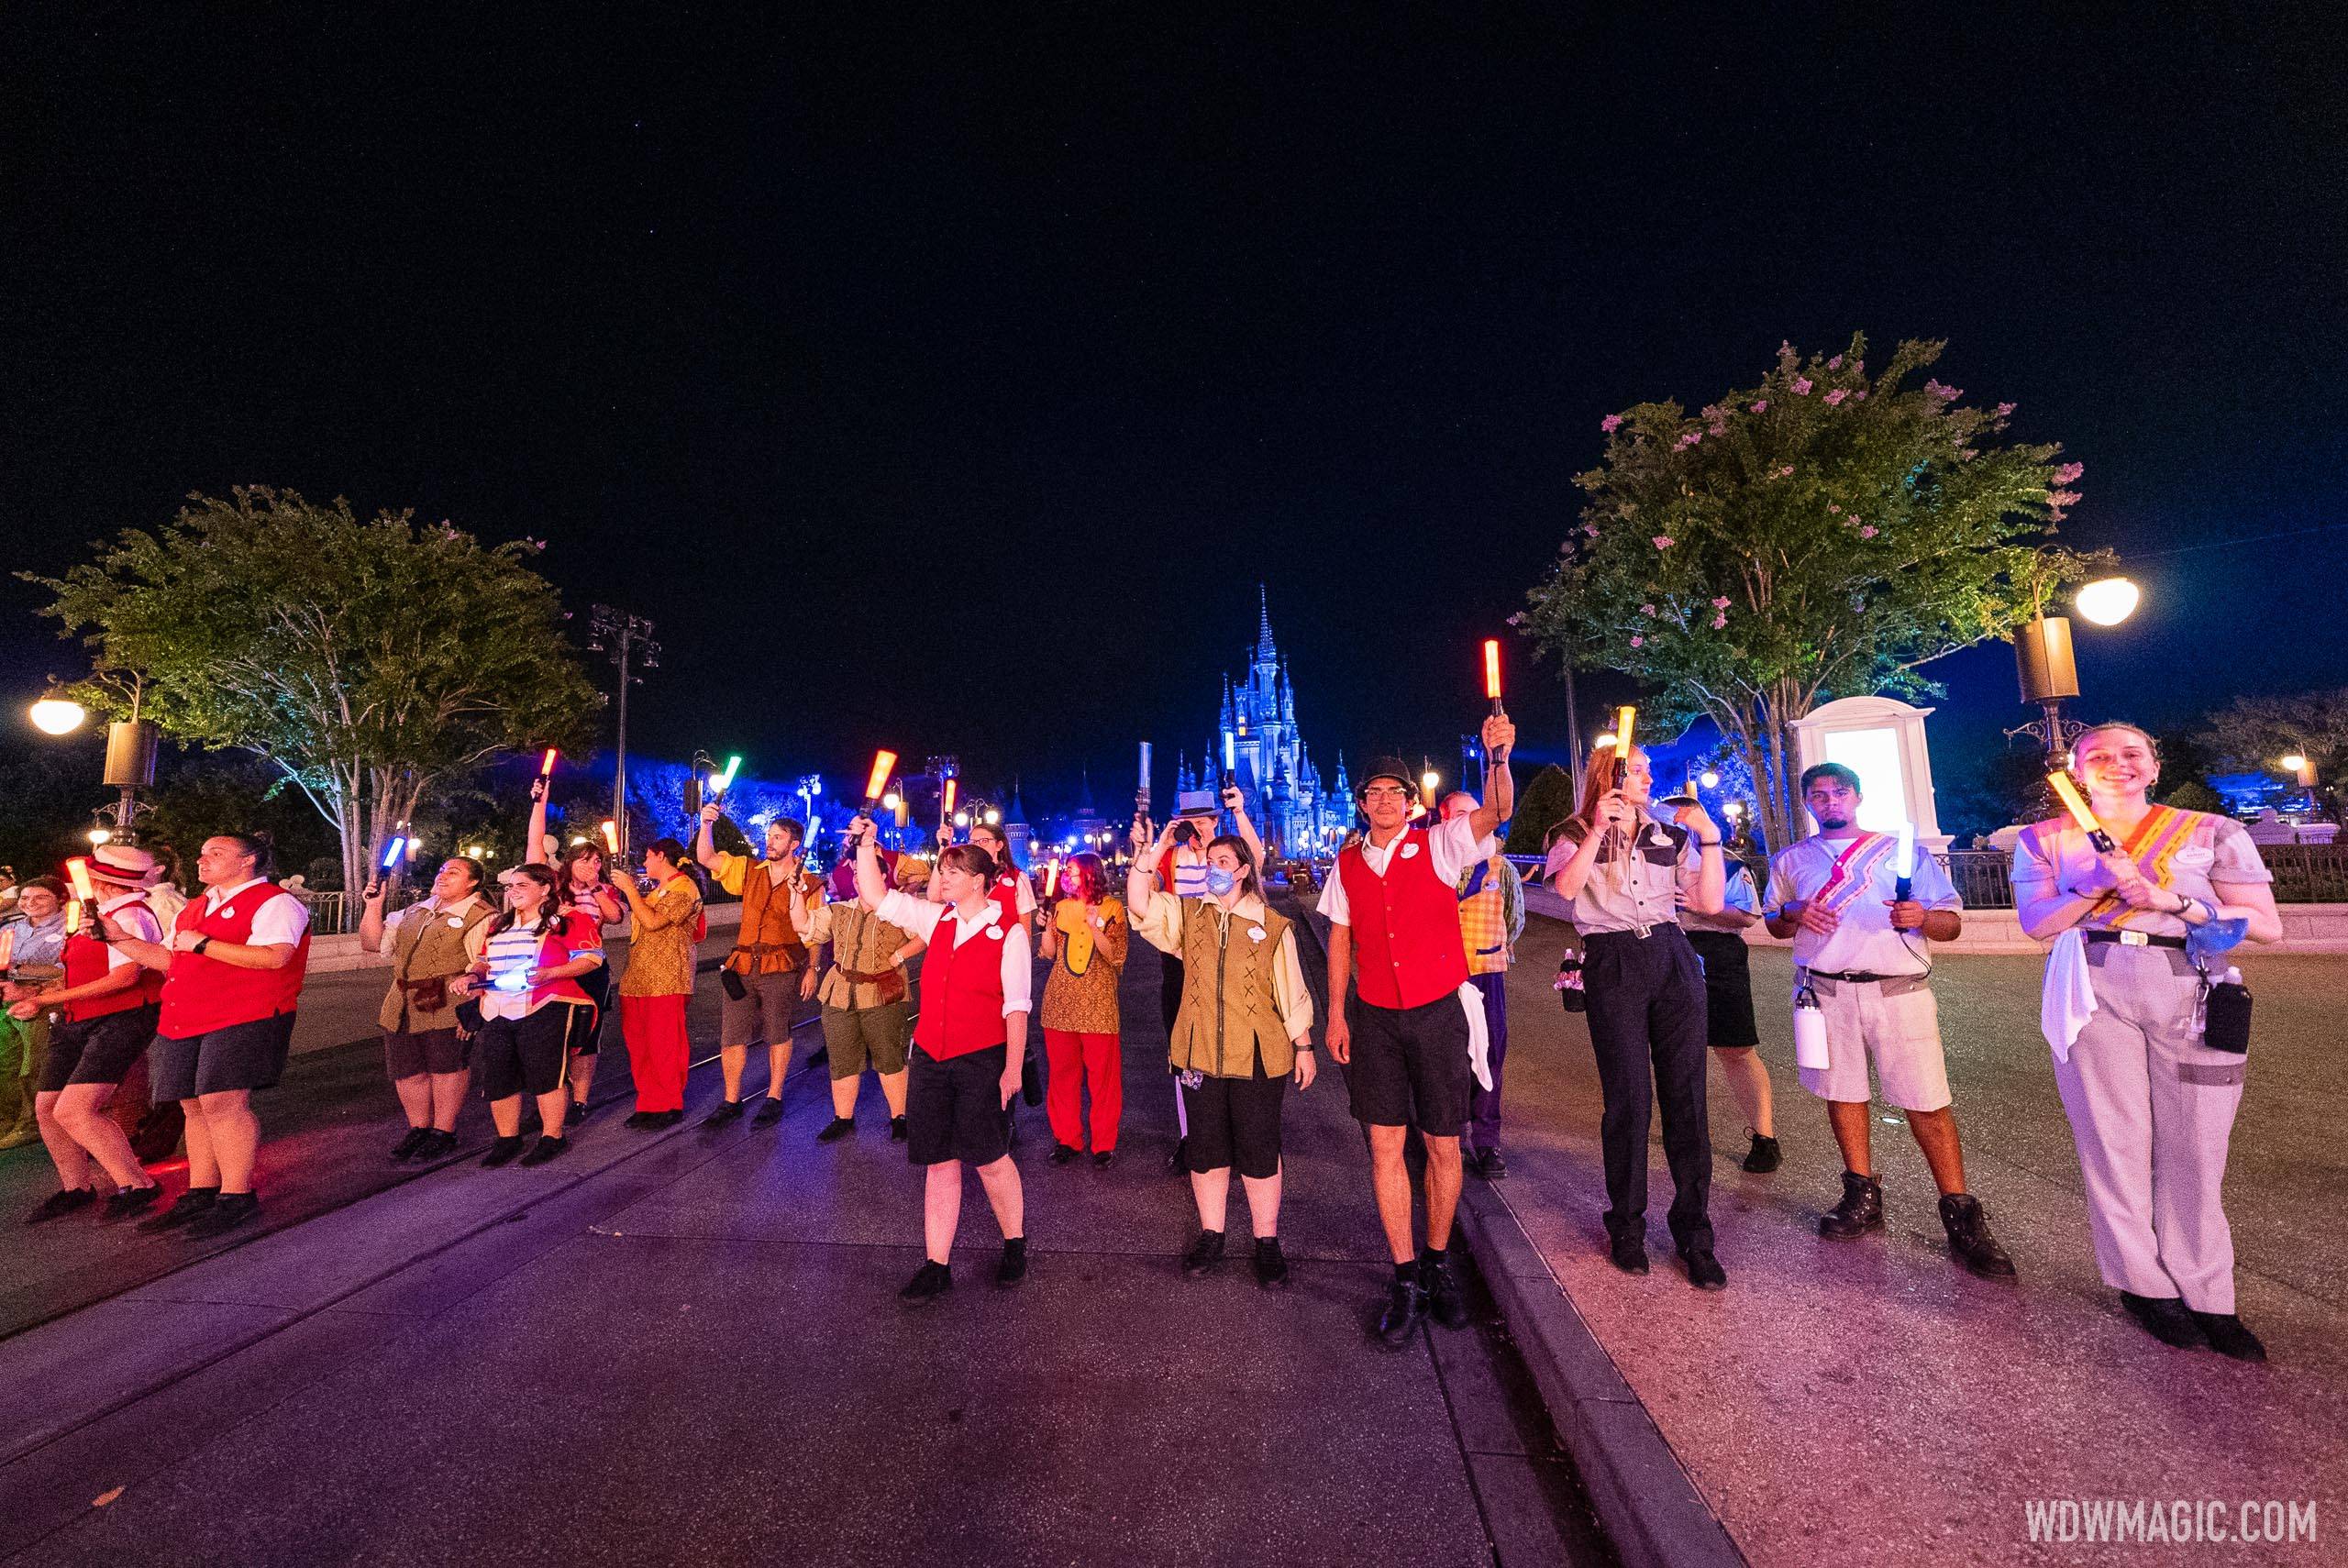 Crowd control Cast Members moving day guests along Main Street U.S.A.